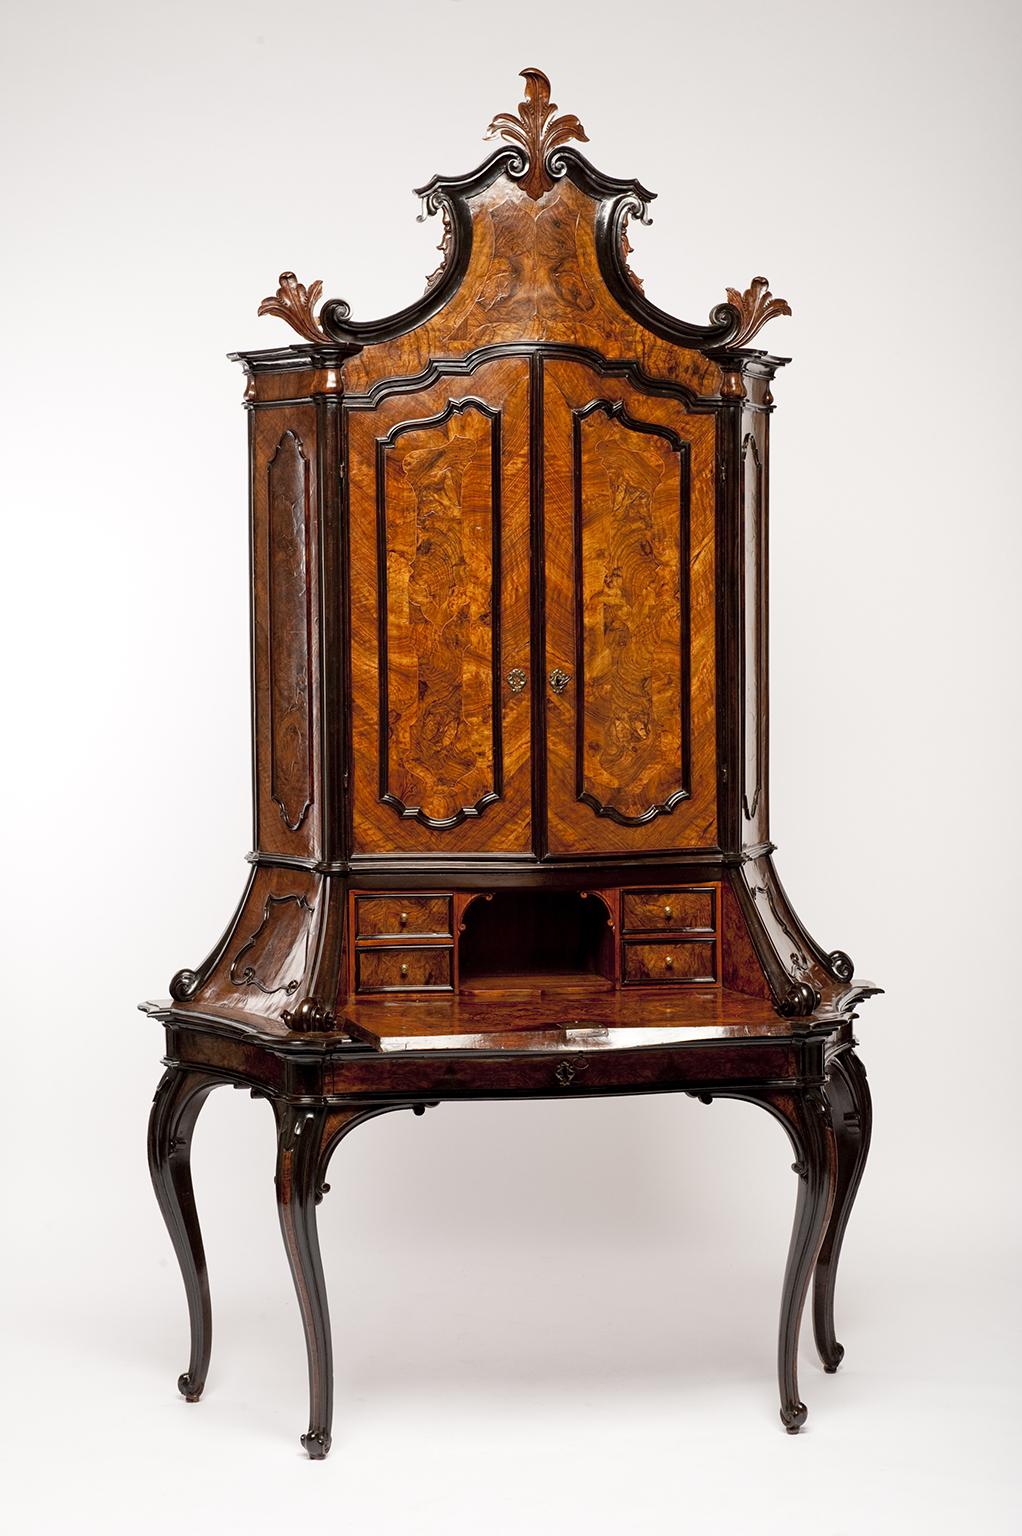 Bureau-cabinet with fold-down writing desk
Lombardy, third quarter of the 18th century
Walnut with carved decoration and walnut-burl veneer; applied ebonized wood trim and cornice
It measures 104 x 60.6 x 22.4 in (264 x 154 x 57 cm)
State of